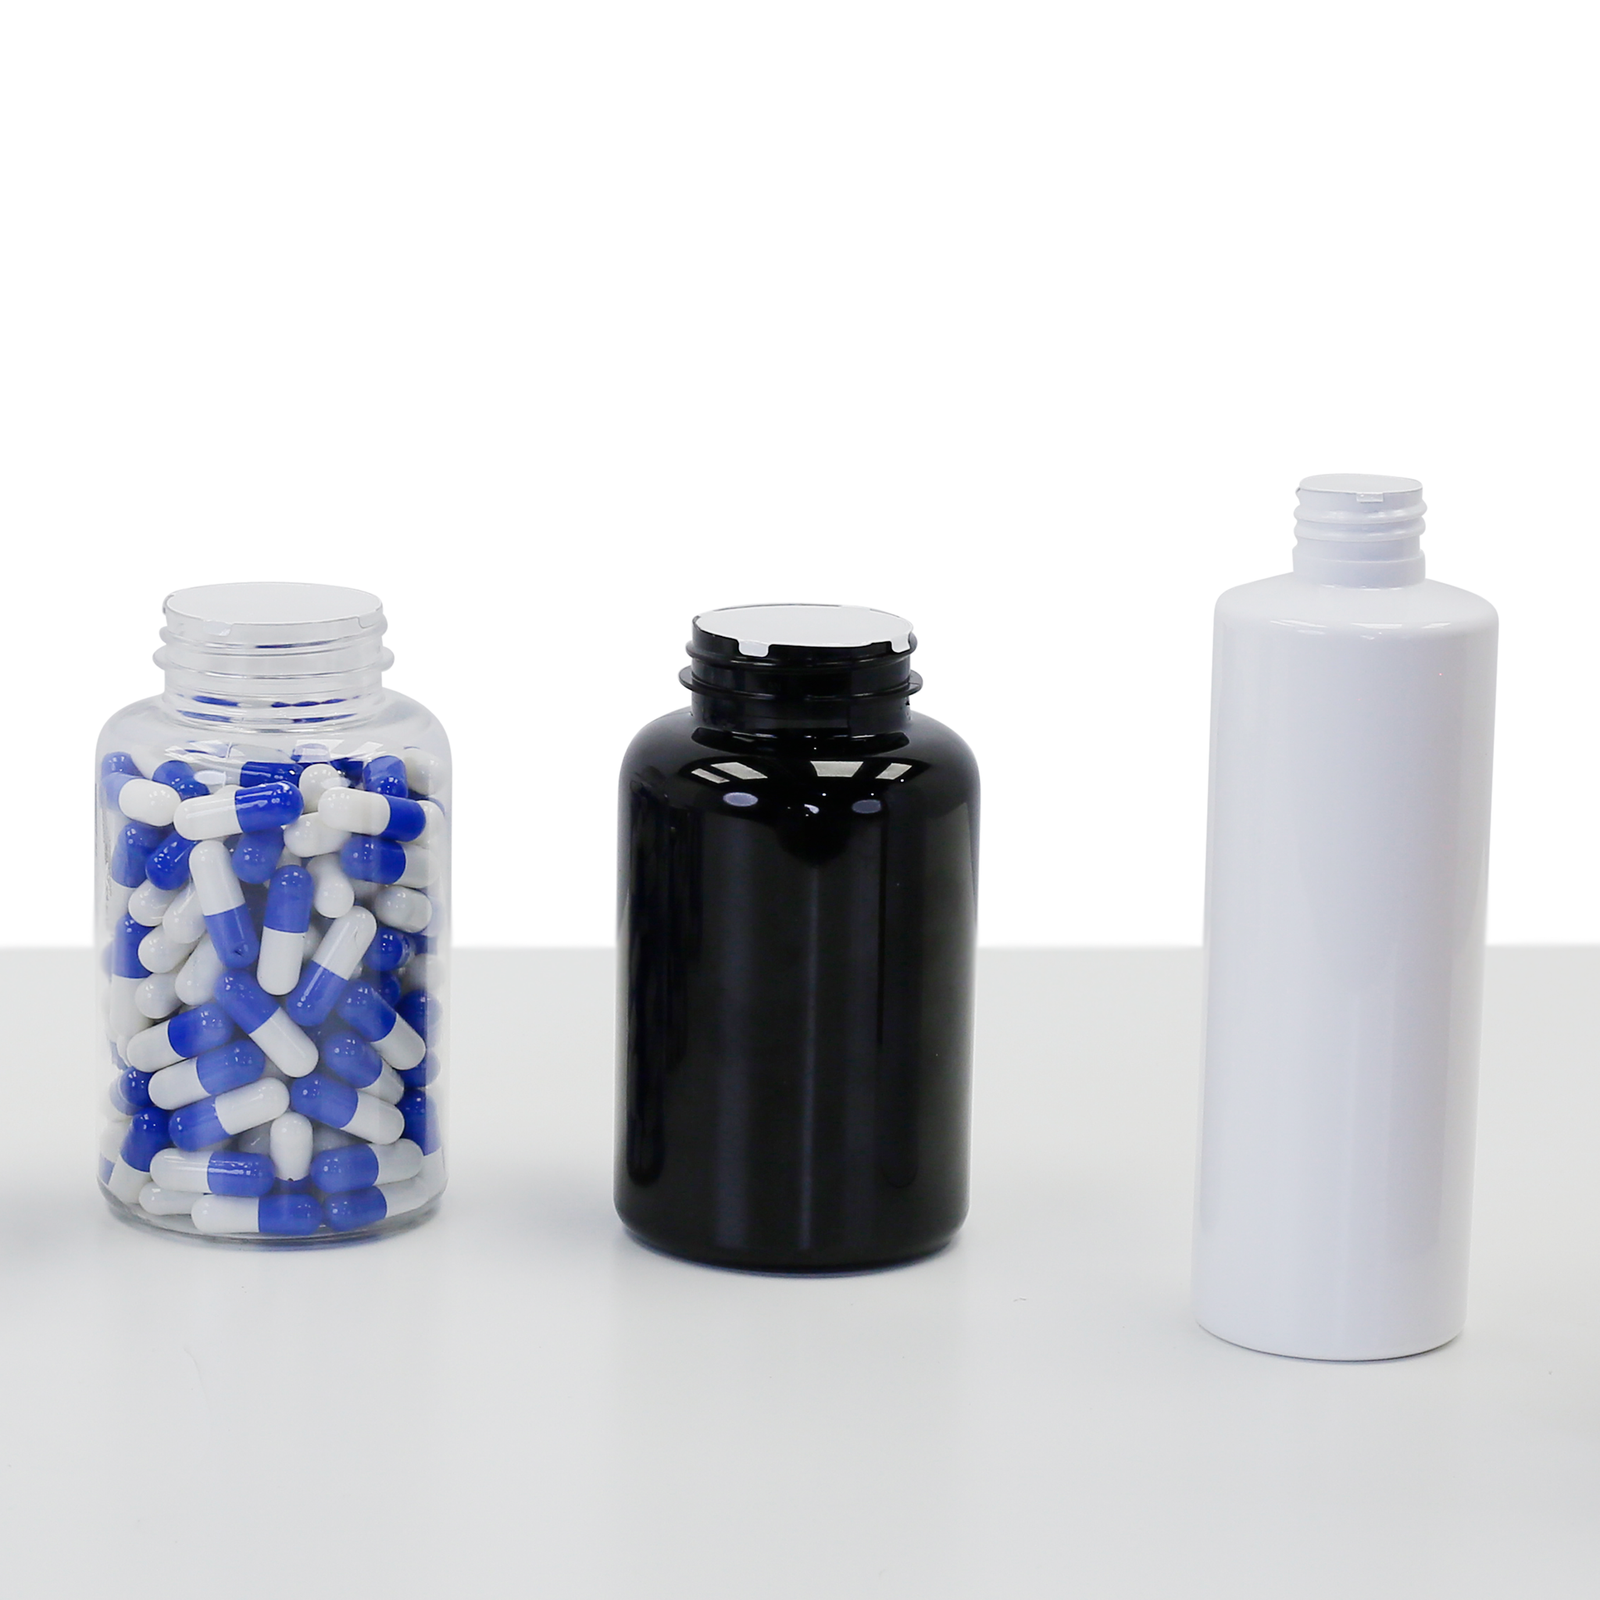 A collection of containers of different sized which have been sealed with induction liners using the Jorestech electromagnetic cap sealer